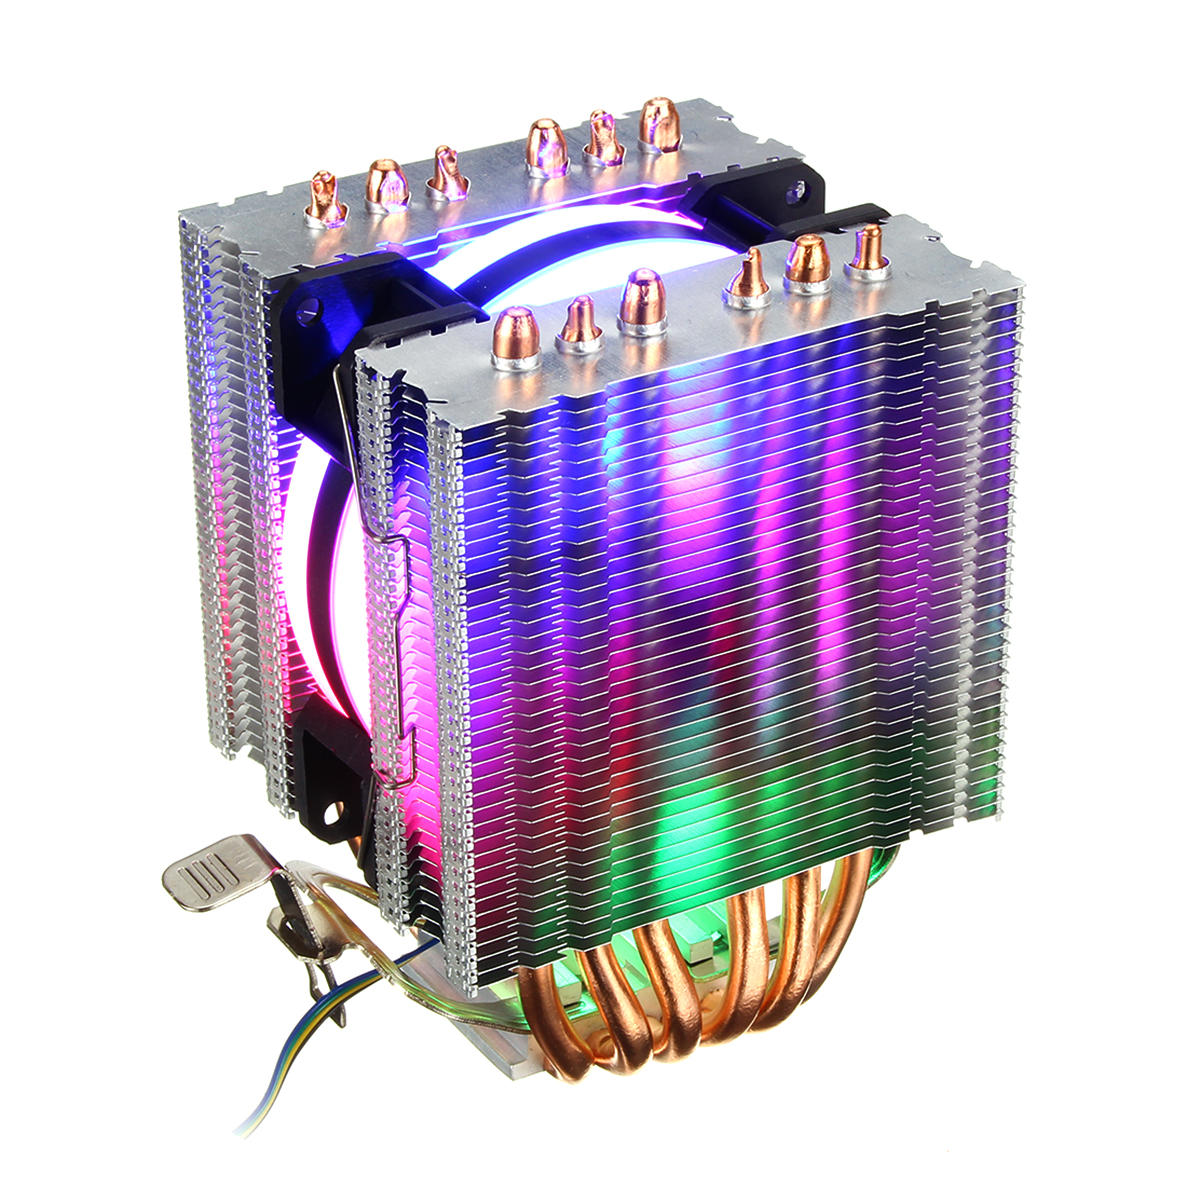 DIY Removable CPU Cooler RGB Cooling Fan For Intel 775 1150 1151 1155 1156 1366